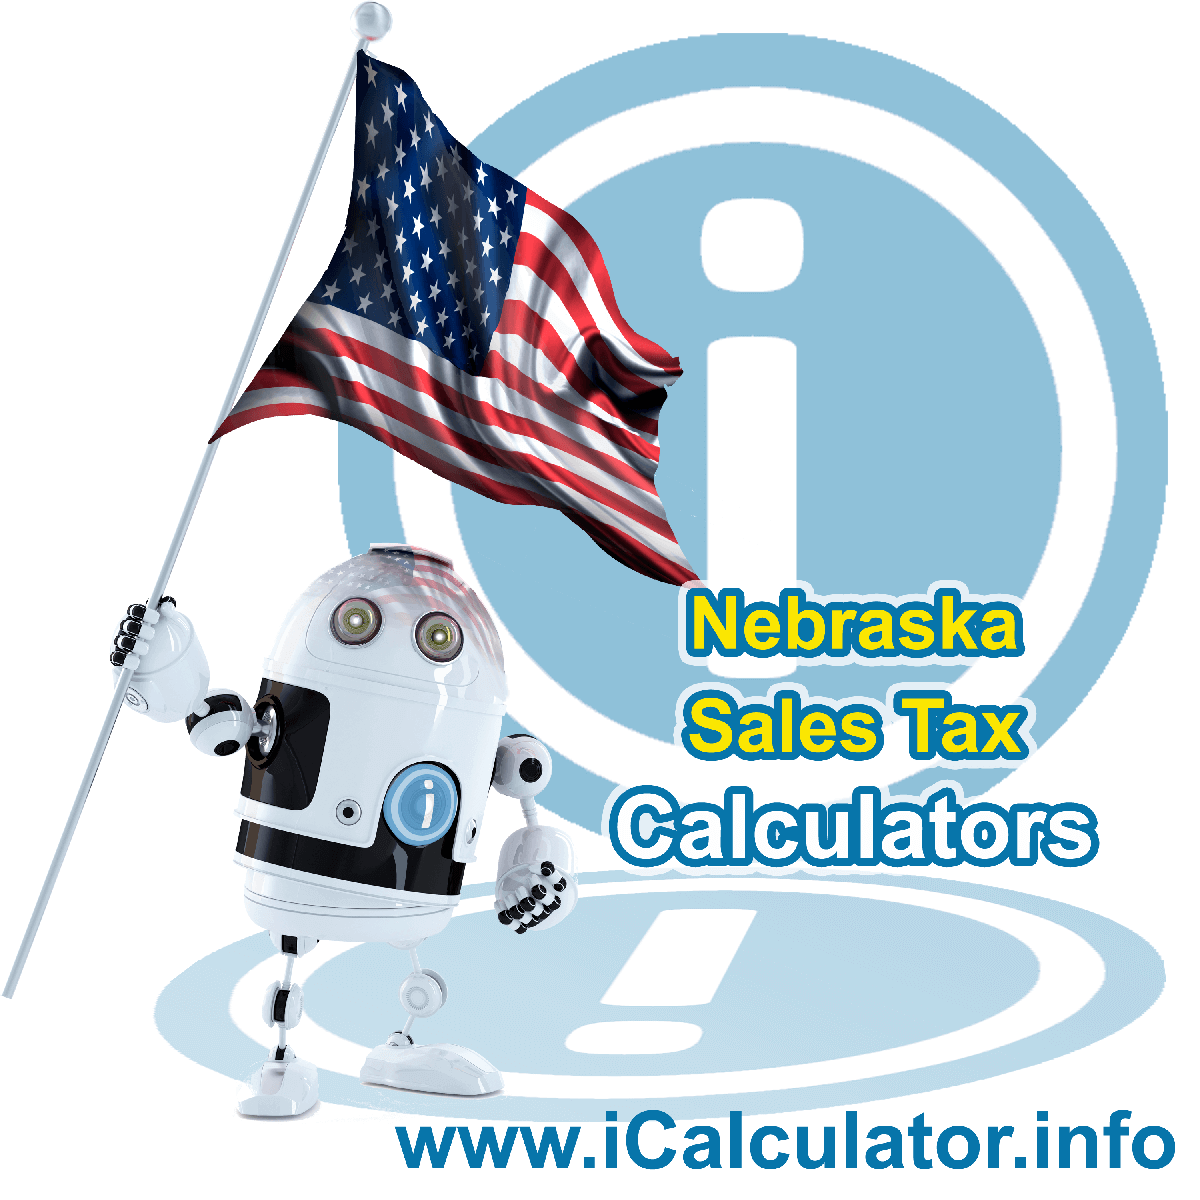 Callaway Sales Rates: This image illustrates a calculator robot calculating Callaway sales tax manually using the Callaway Sales Tax Formula. You can use this information to calculate Callaway Sales Tax manually or use the Callaway Sales Tax Calculator to calculate sales tax online.